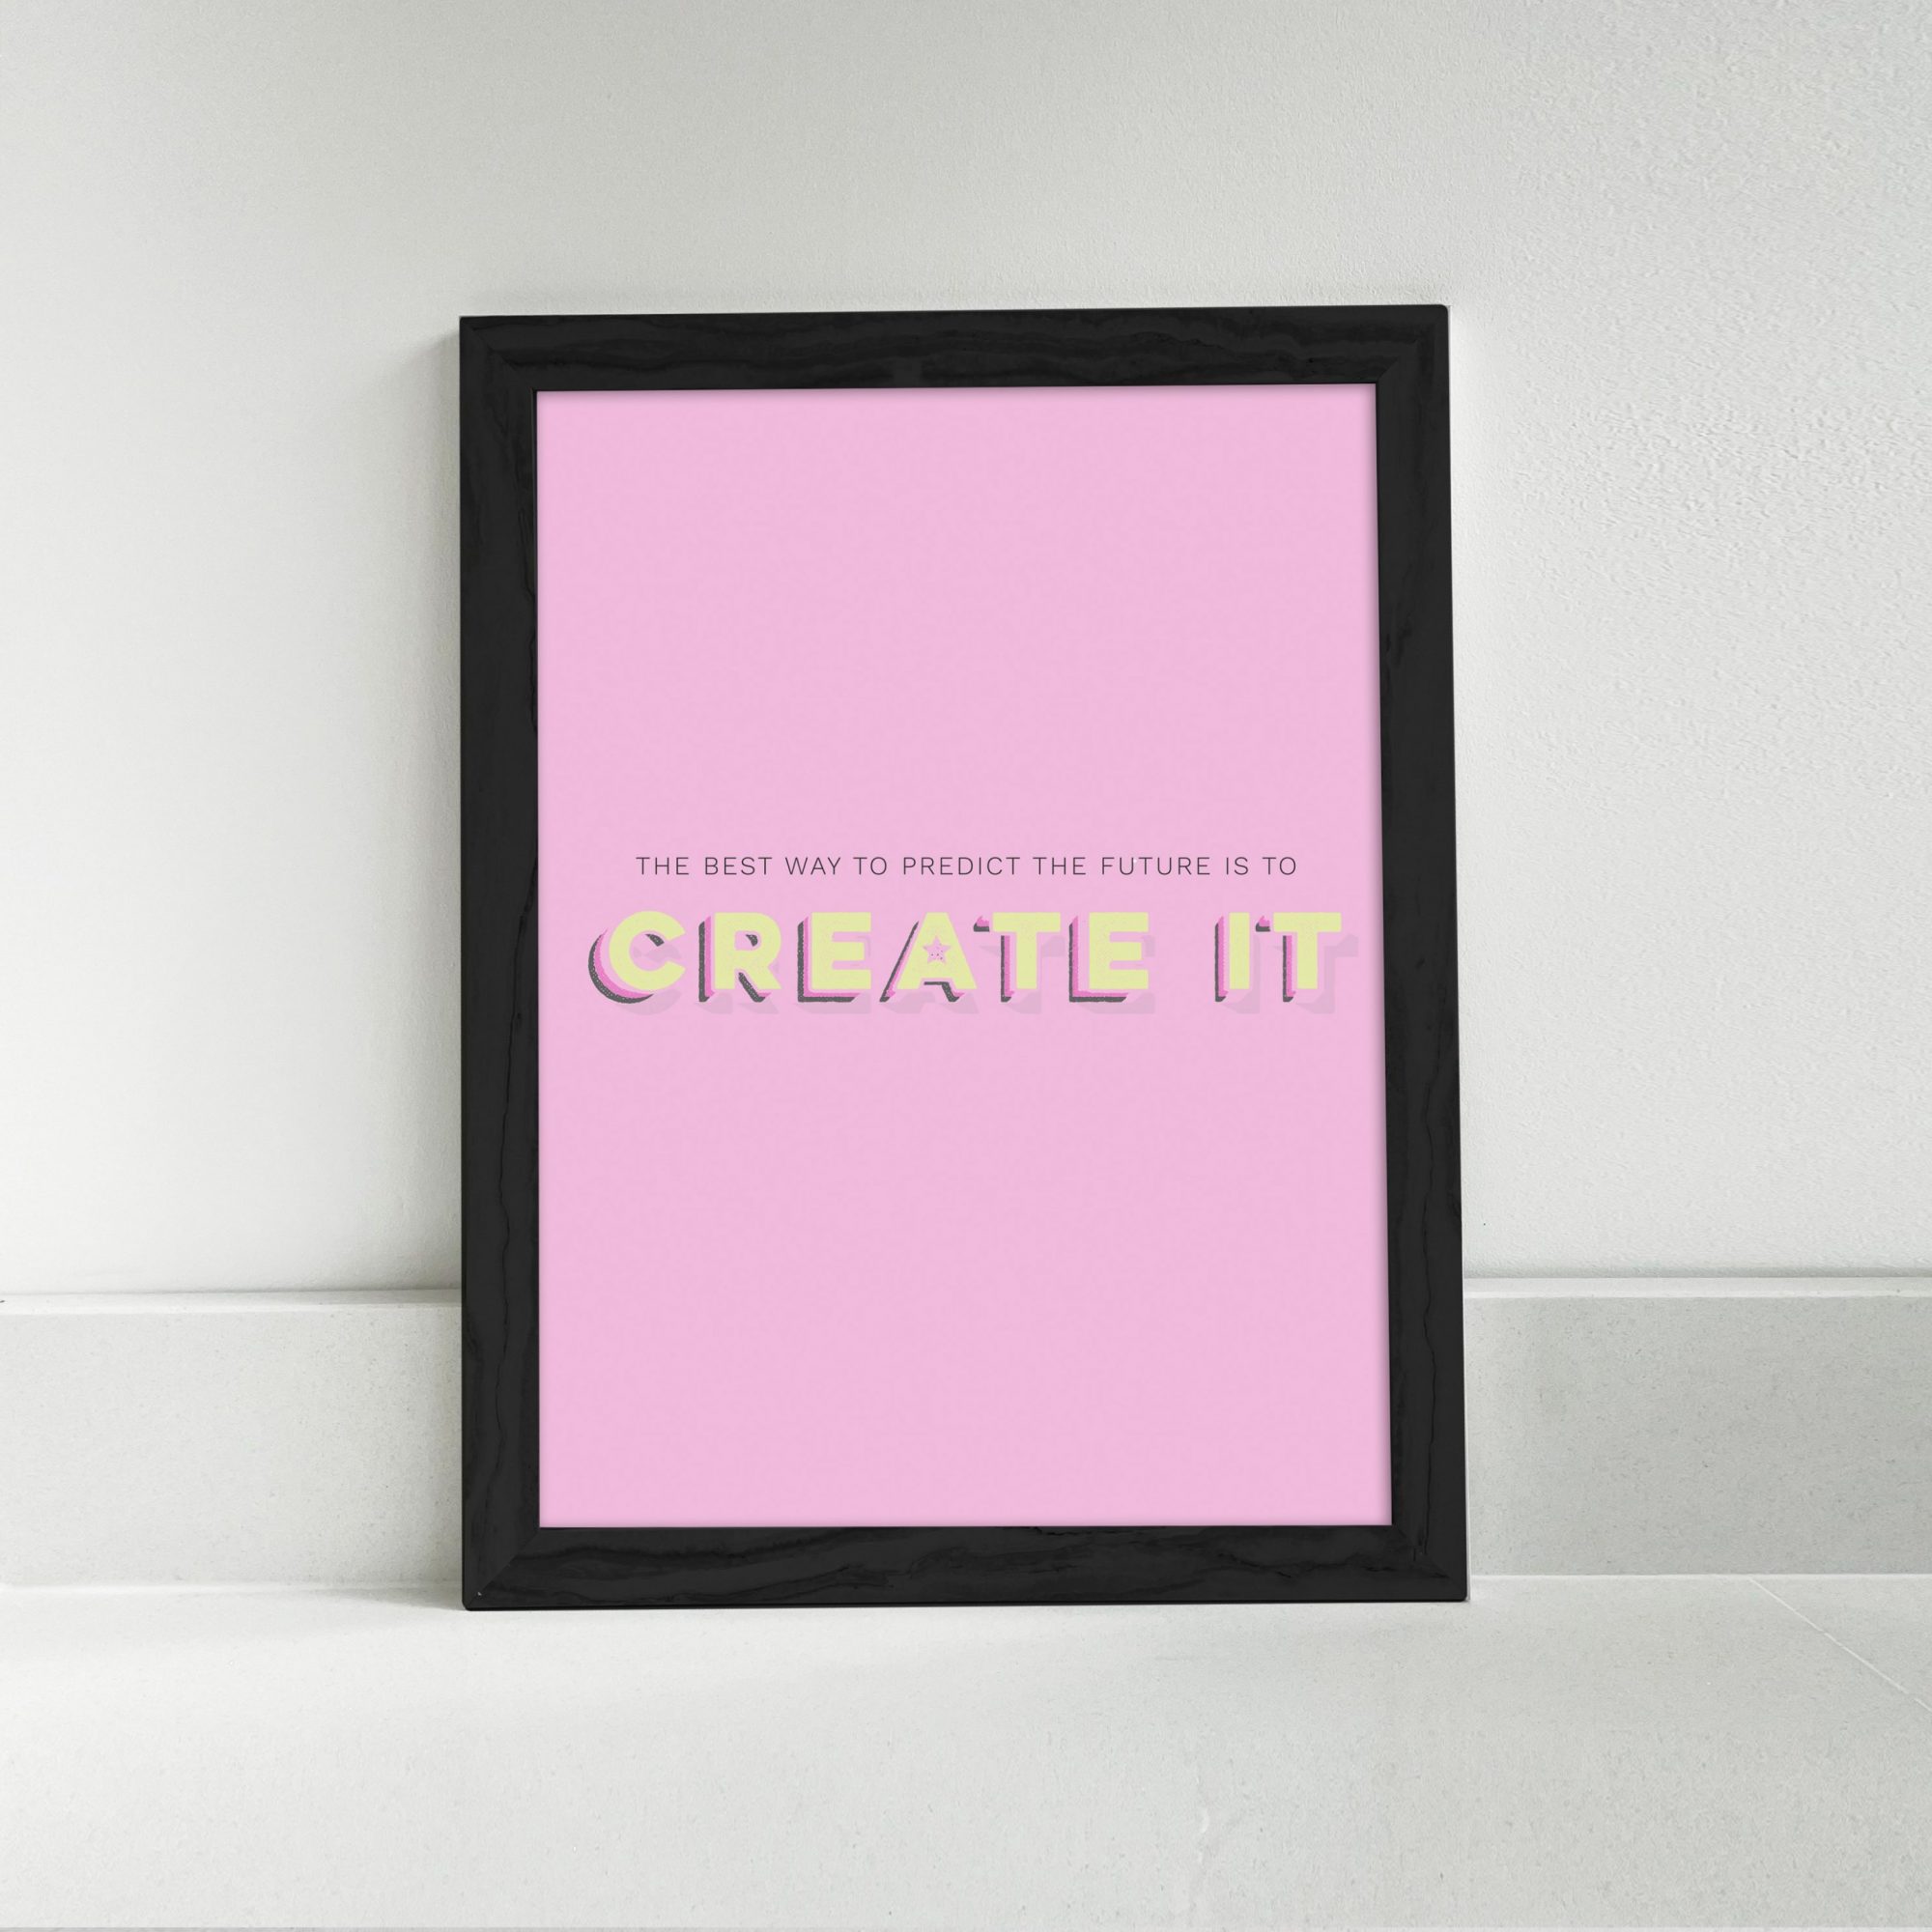 Powerful business quotes: The best way to predict the future is to create it - pink